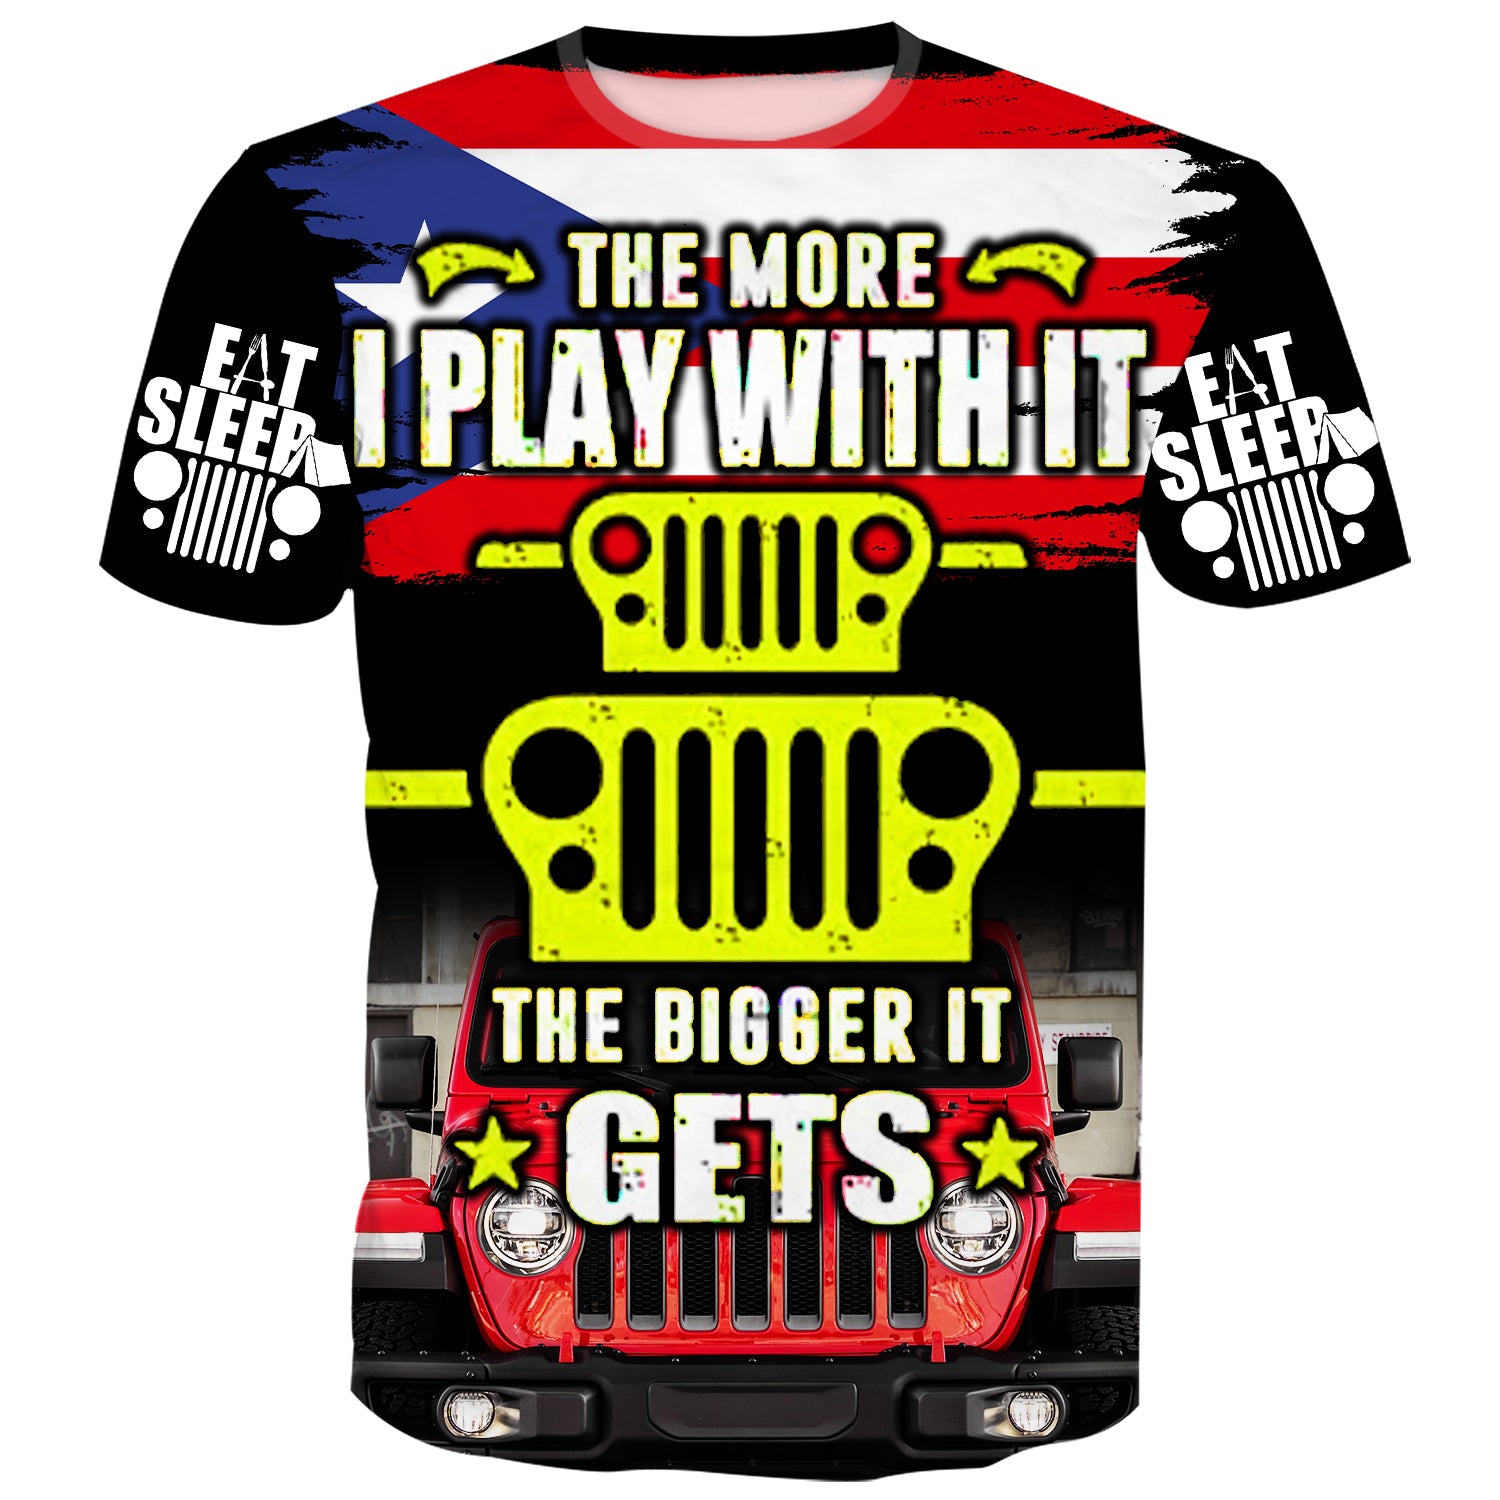 The more I play with it, the bigger it gets - T-Shirt